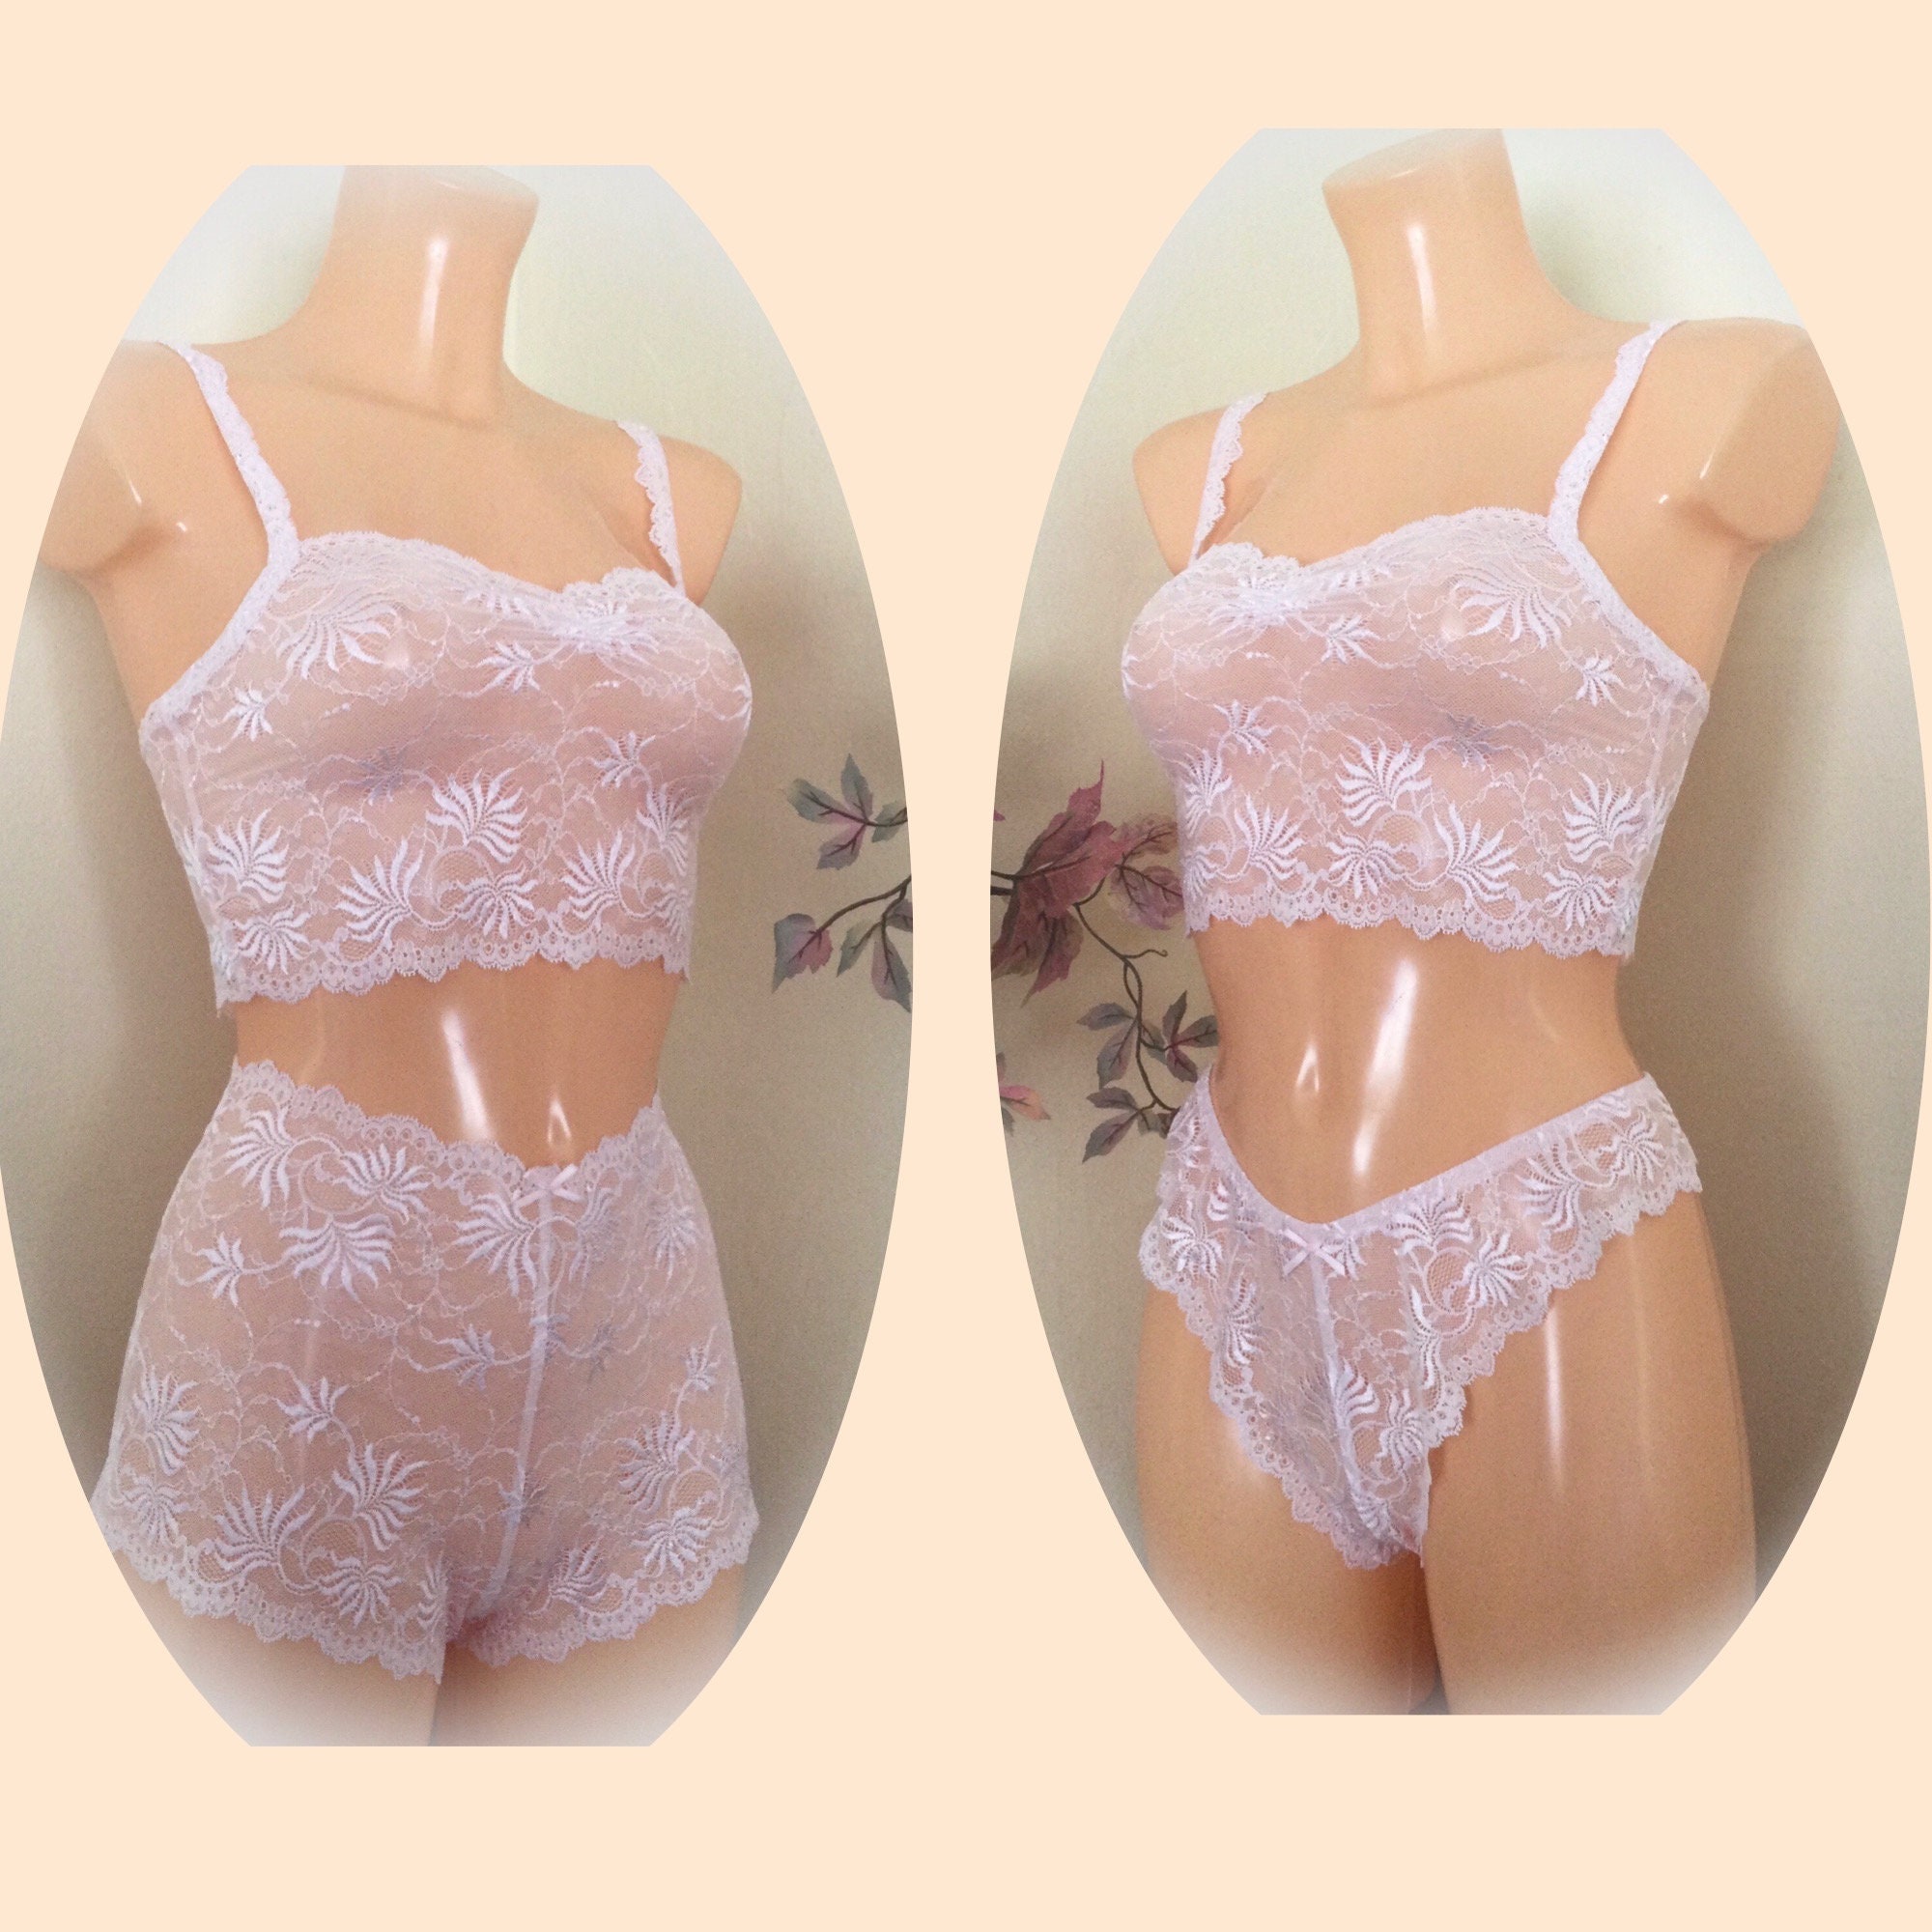 AA Cup Bralette Vest, No Cup Bra Set, Choice of Thong or Shortie Sultry  Underwear Set. -  Norway